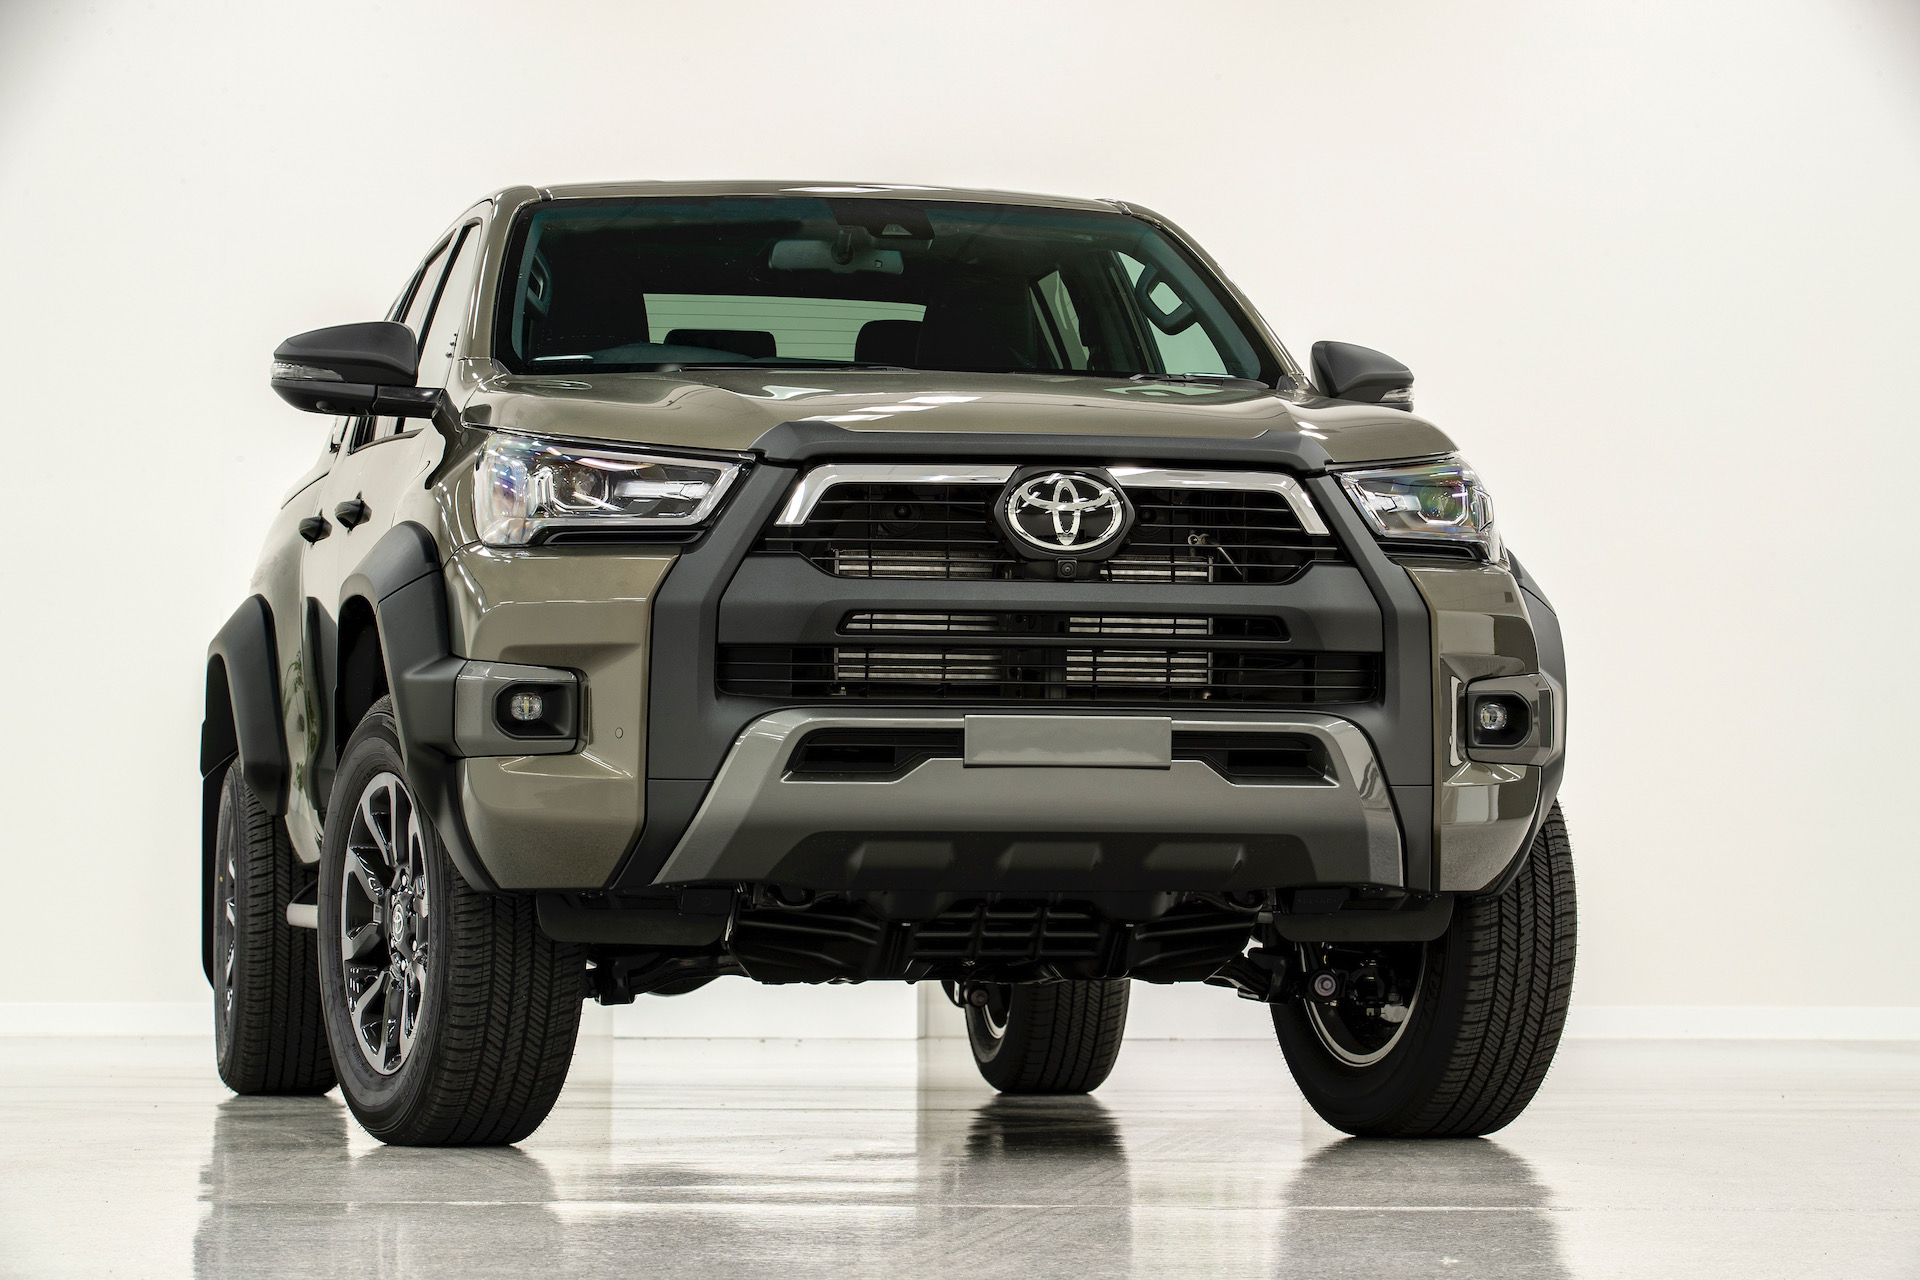 2023 Toyota HiLux update for Australia: Rogue heavily revised, Rugged X replaced